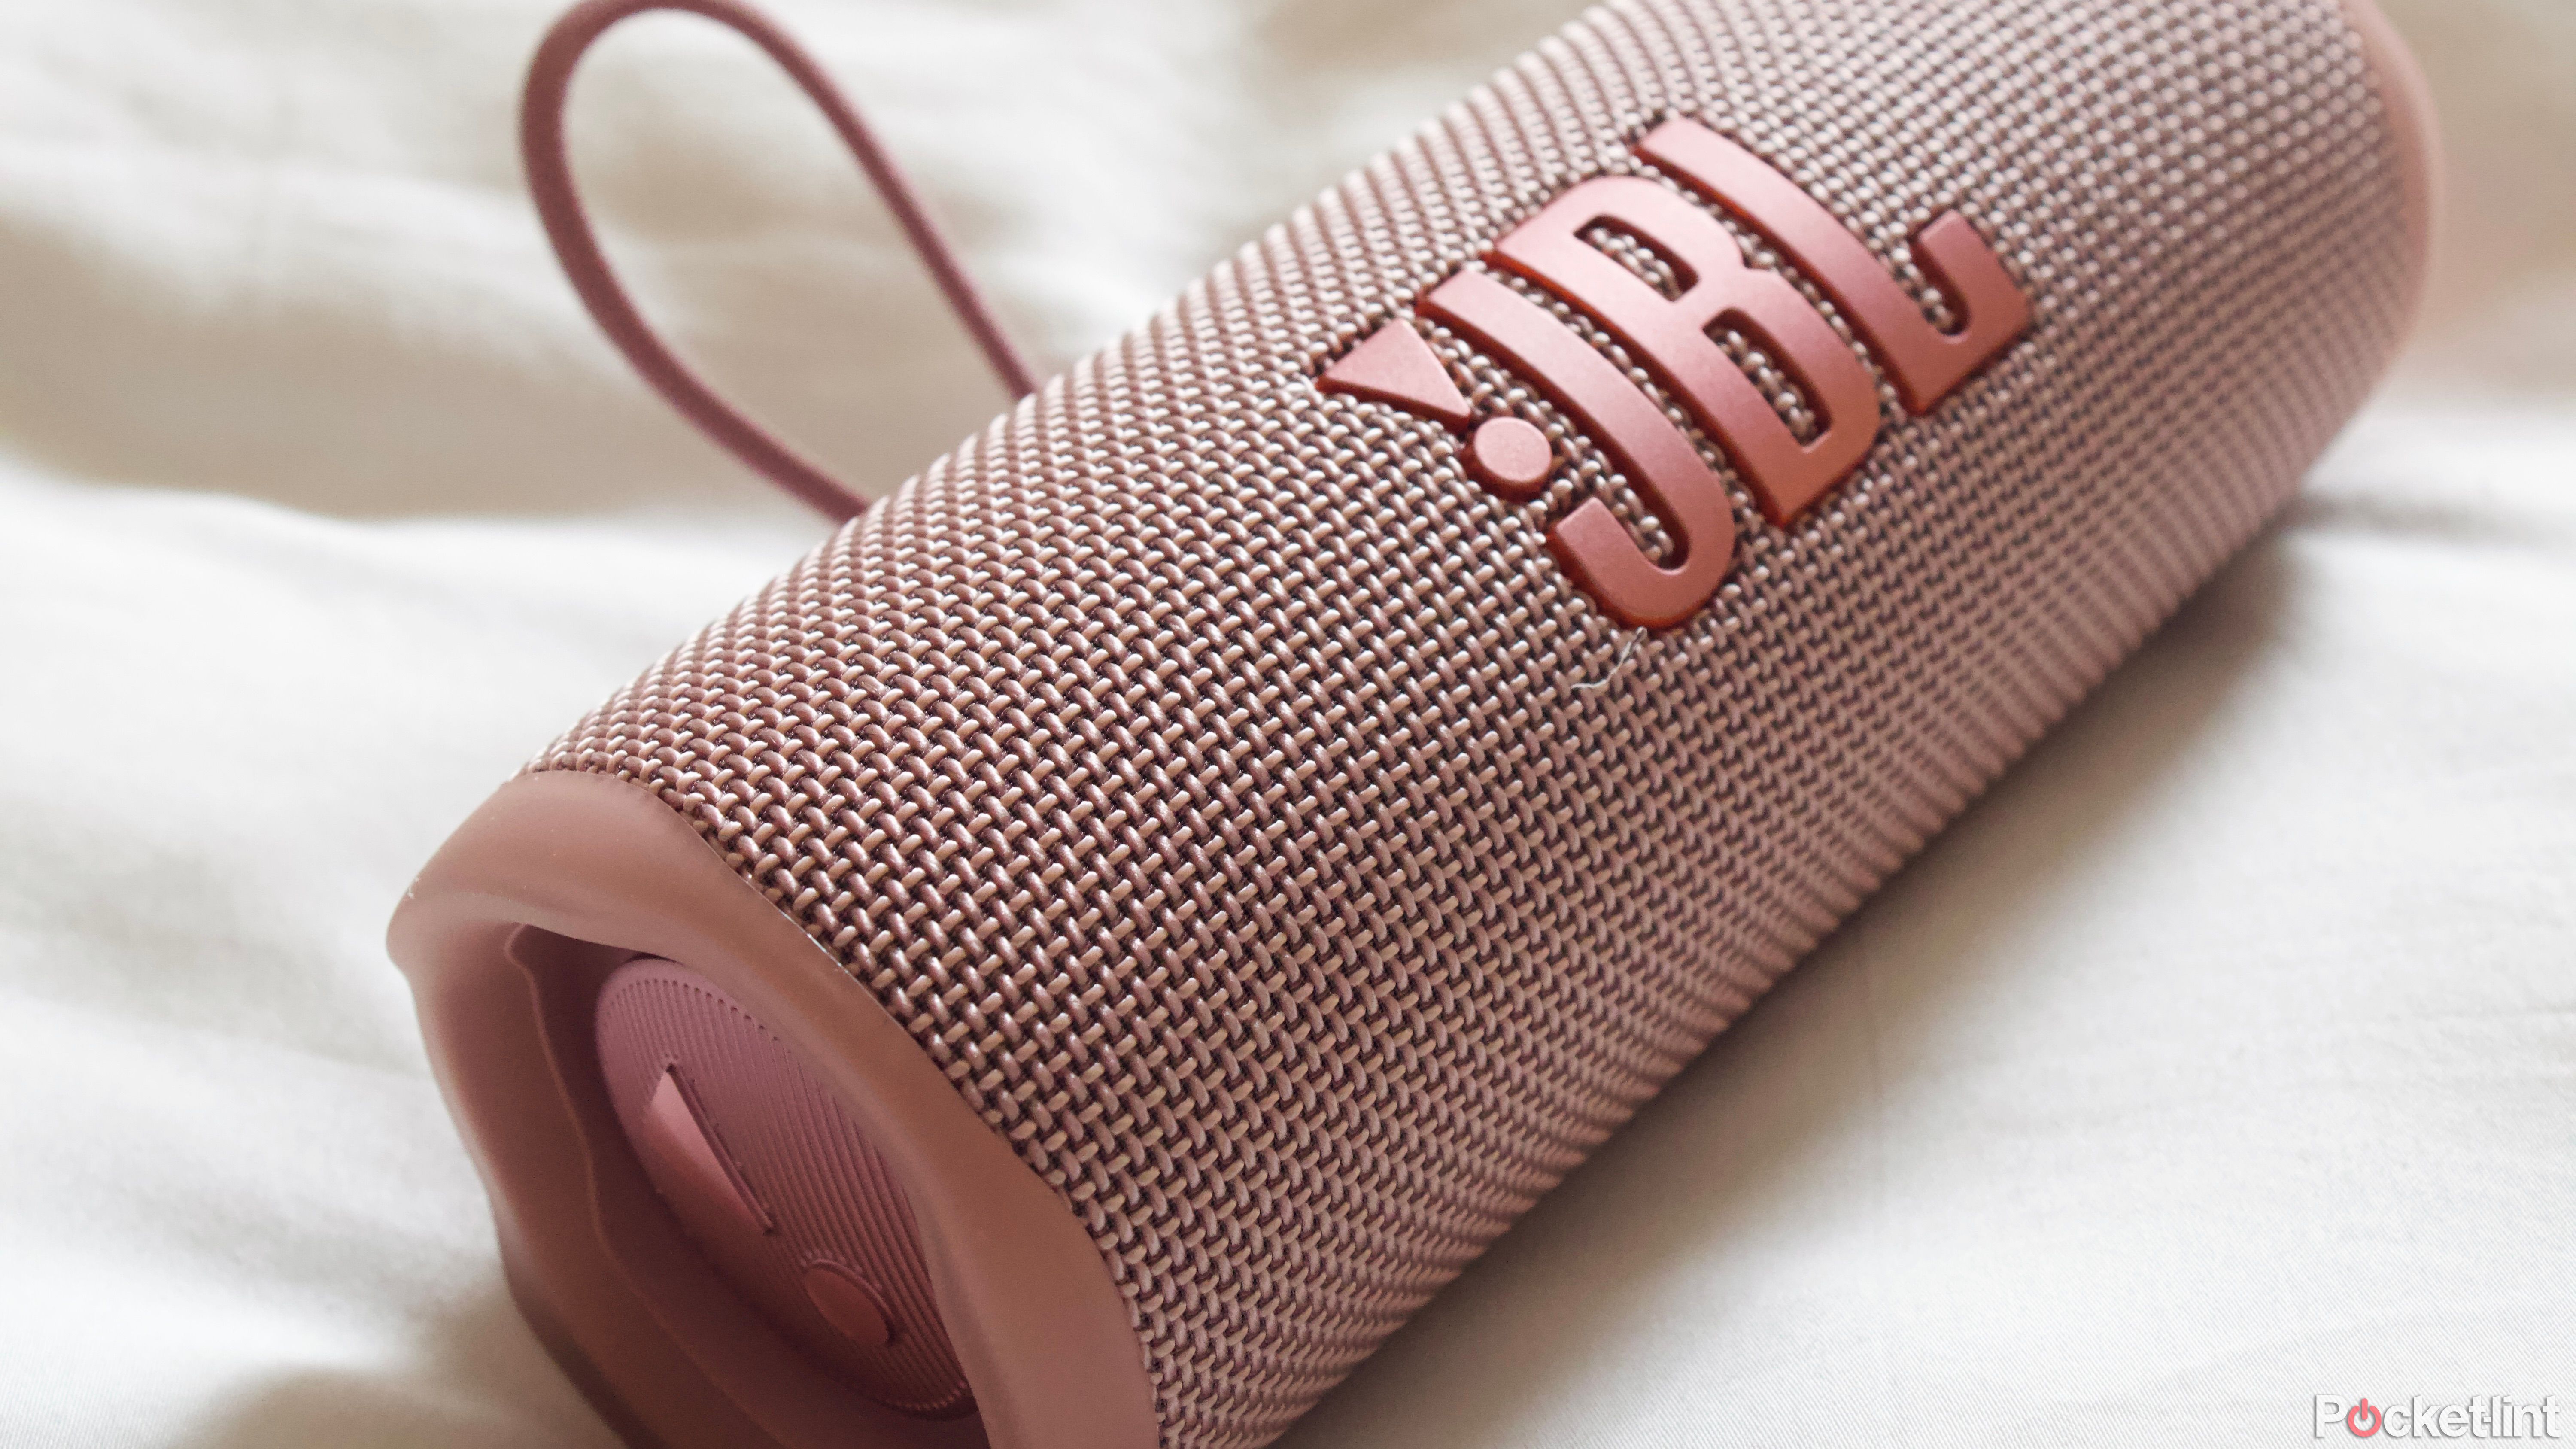 Grab the fantastic JBL Flip 6 at its lowest price on  while